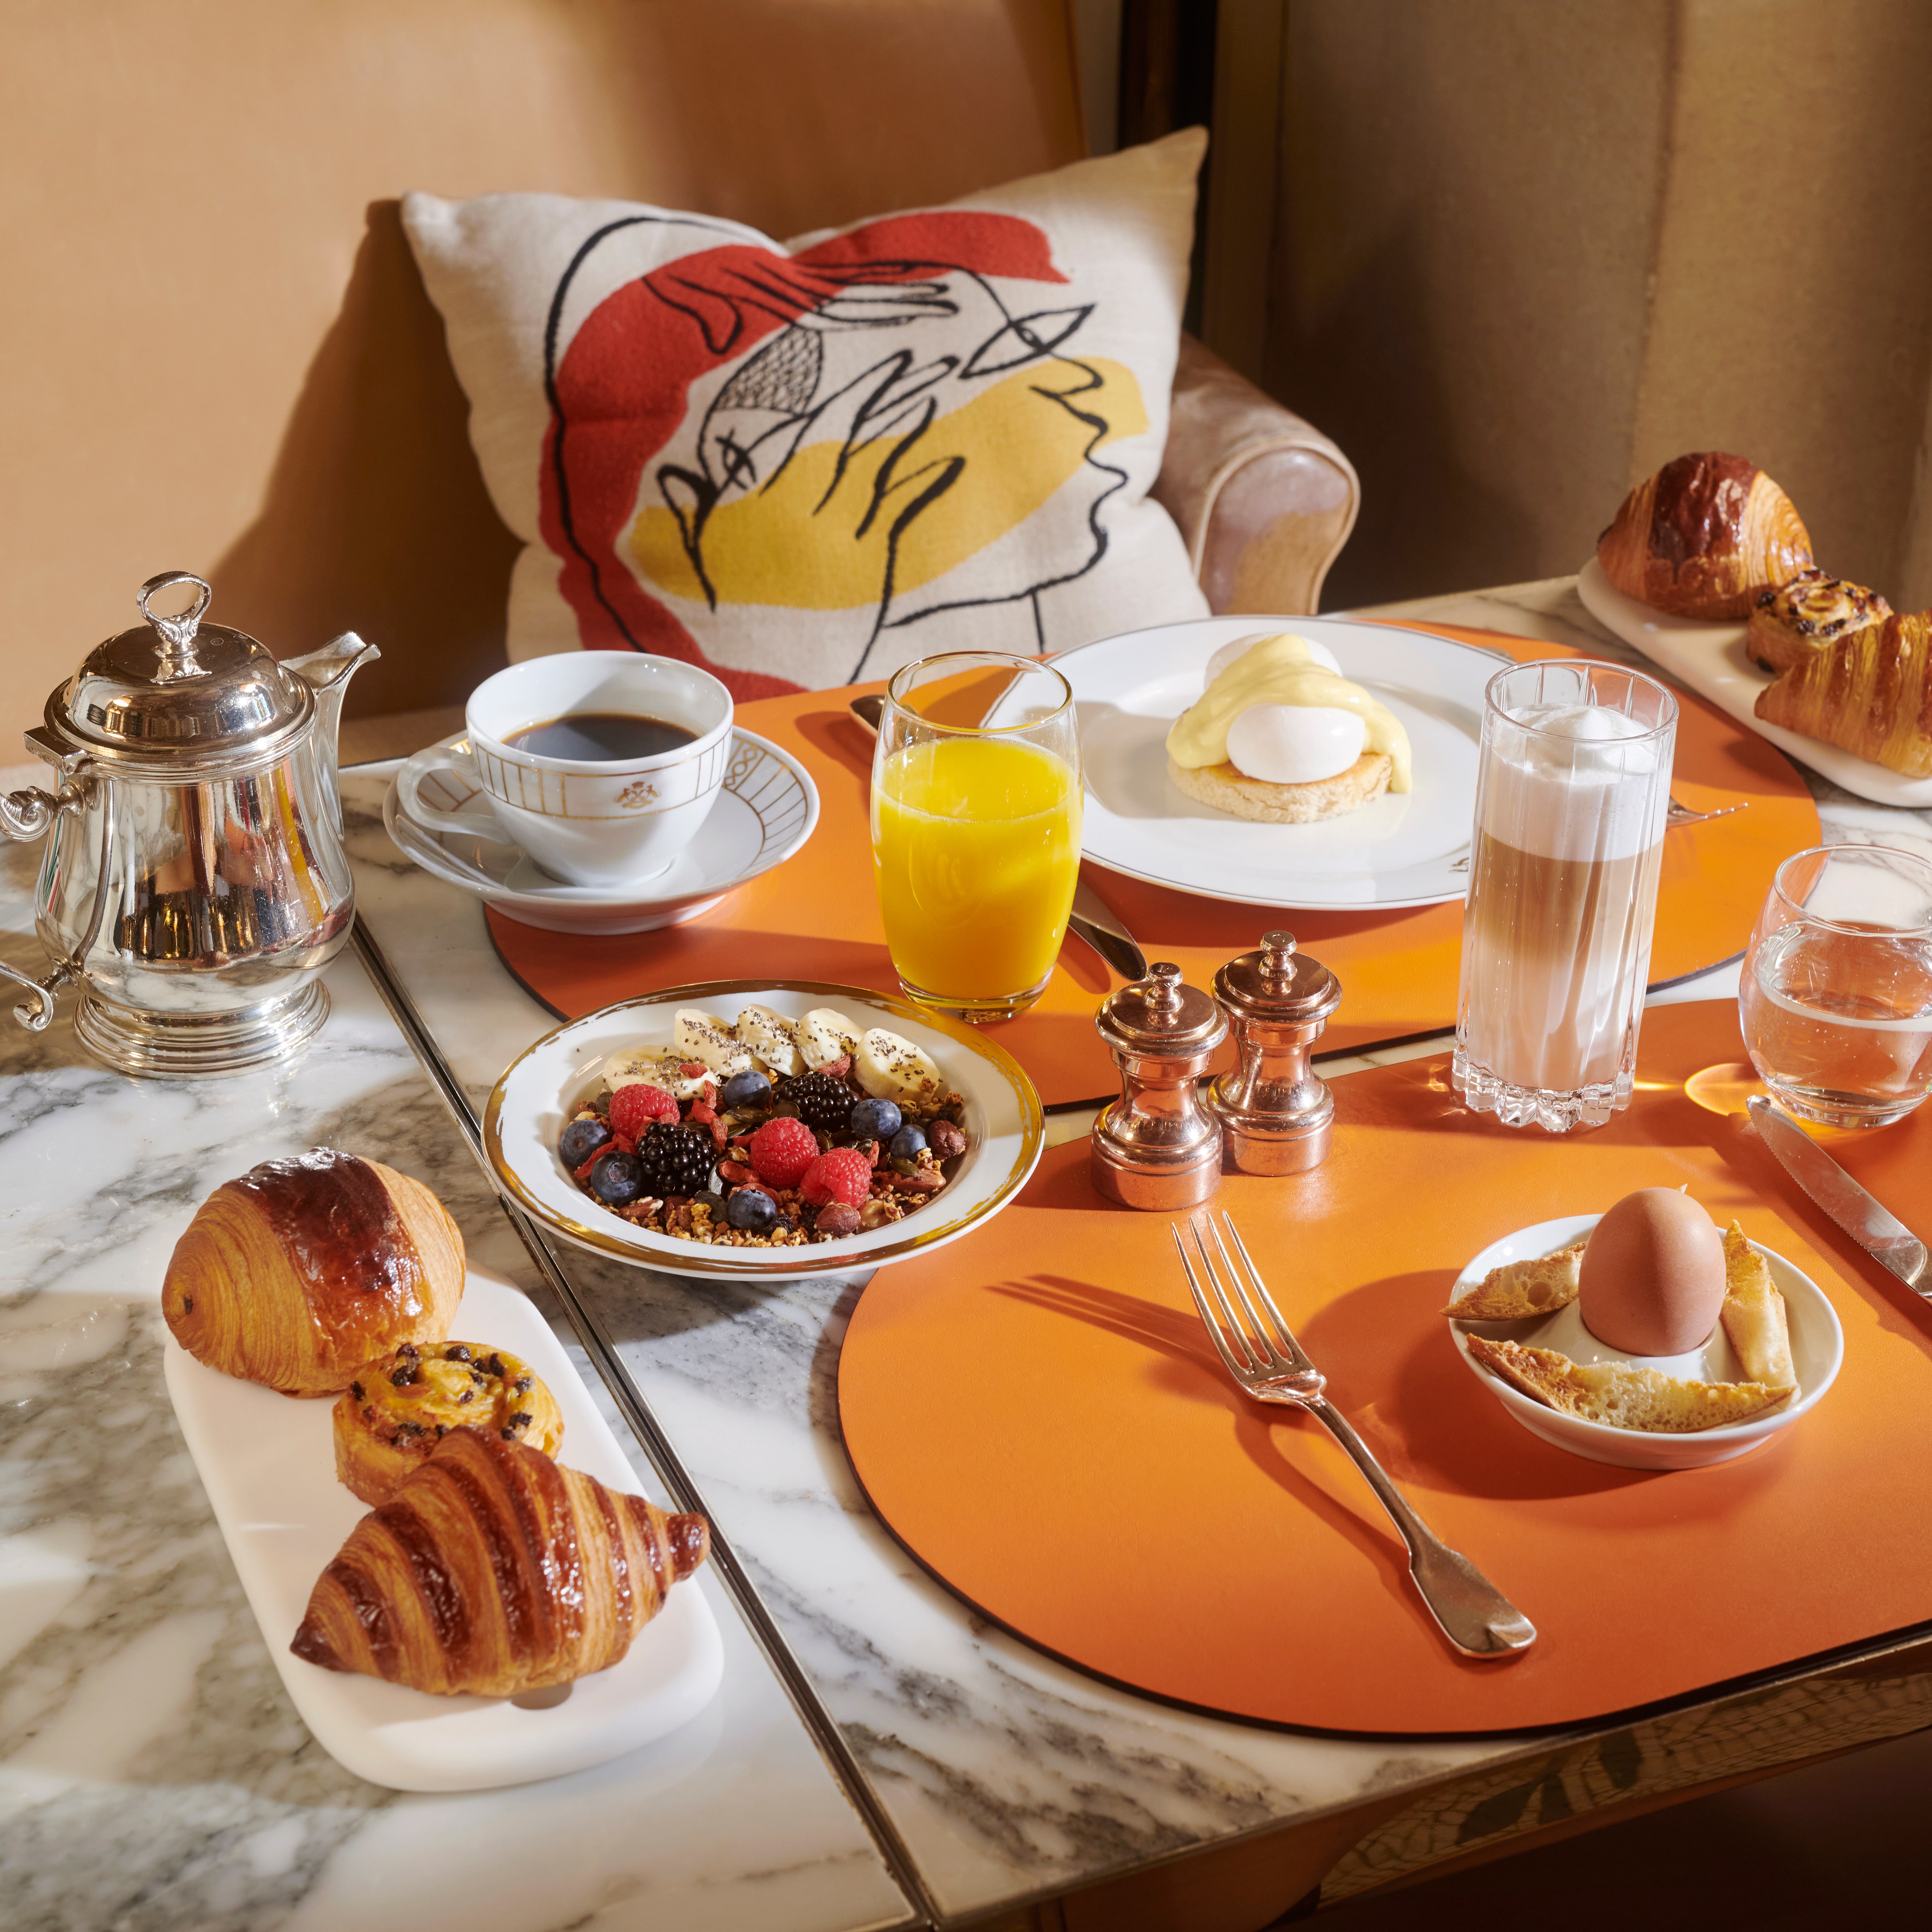 The Best Hotel Breakfasts We Ate This Year